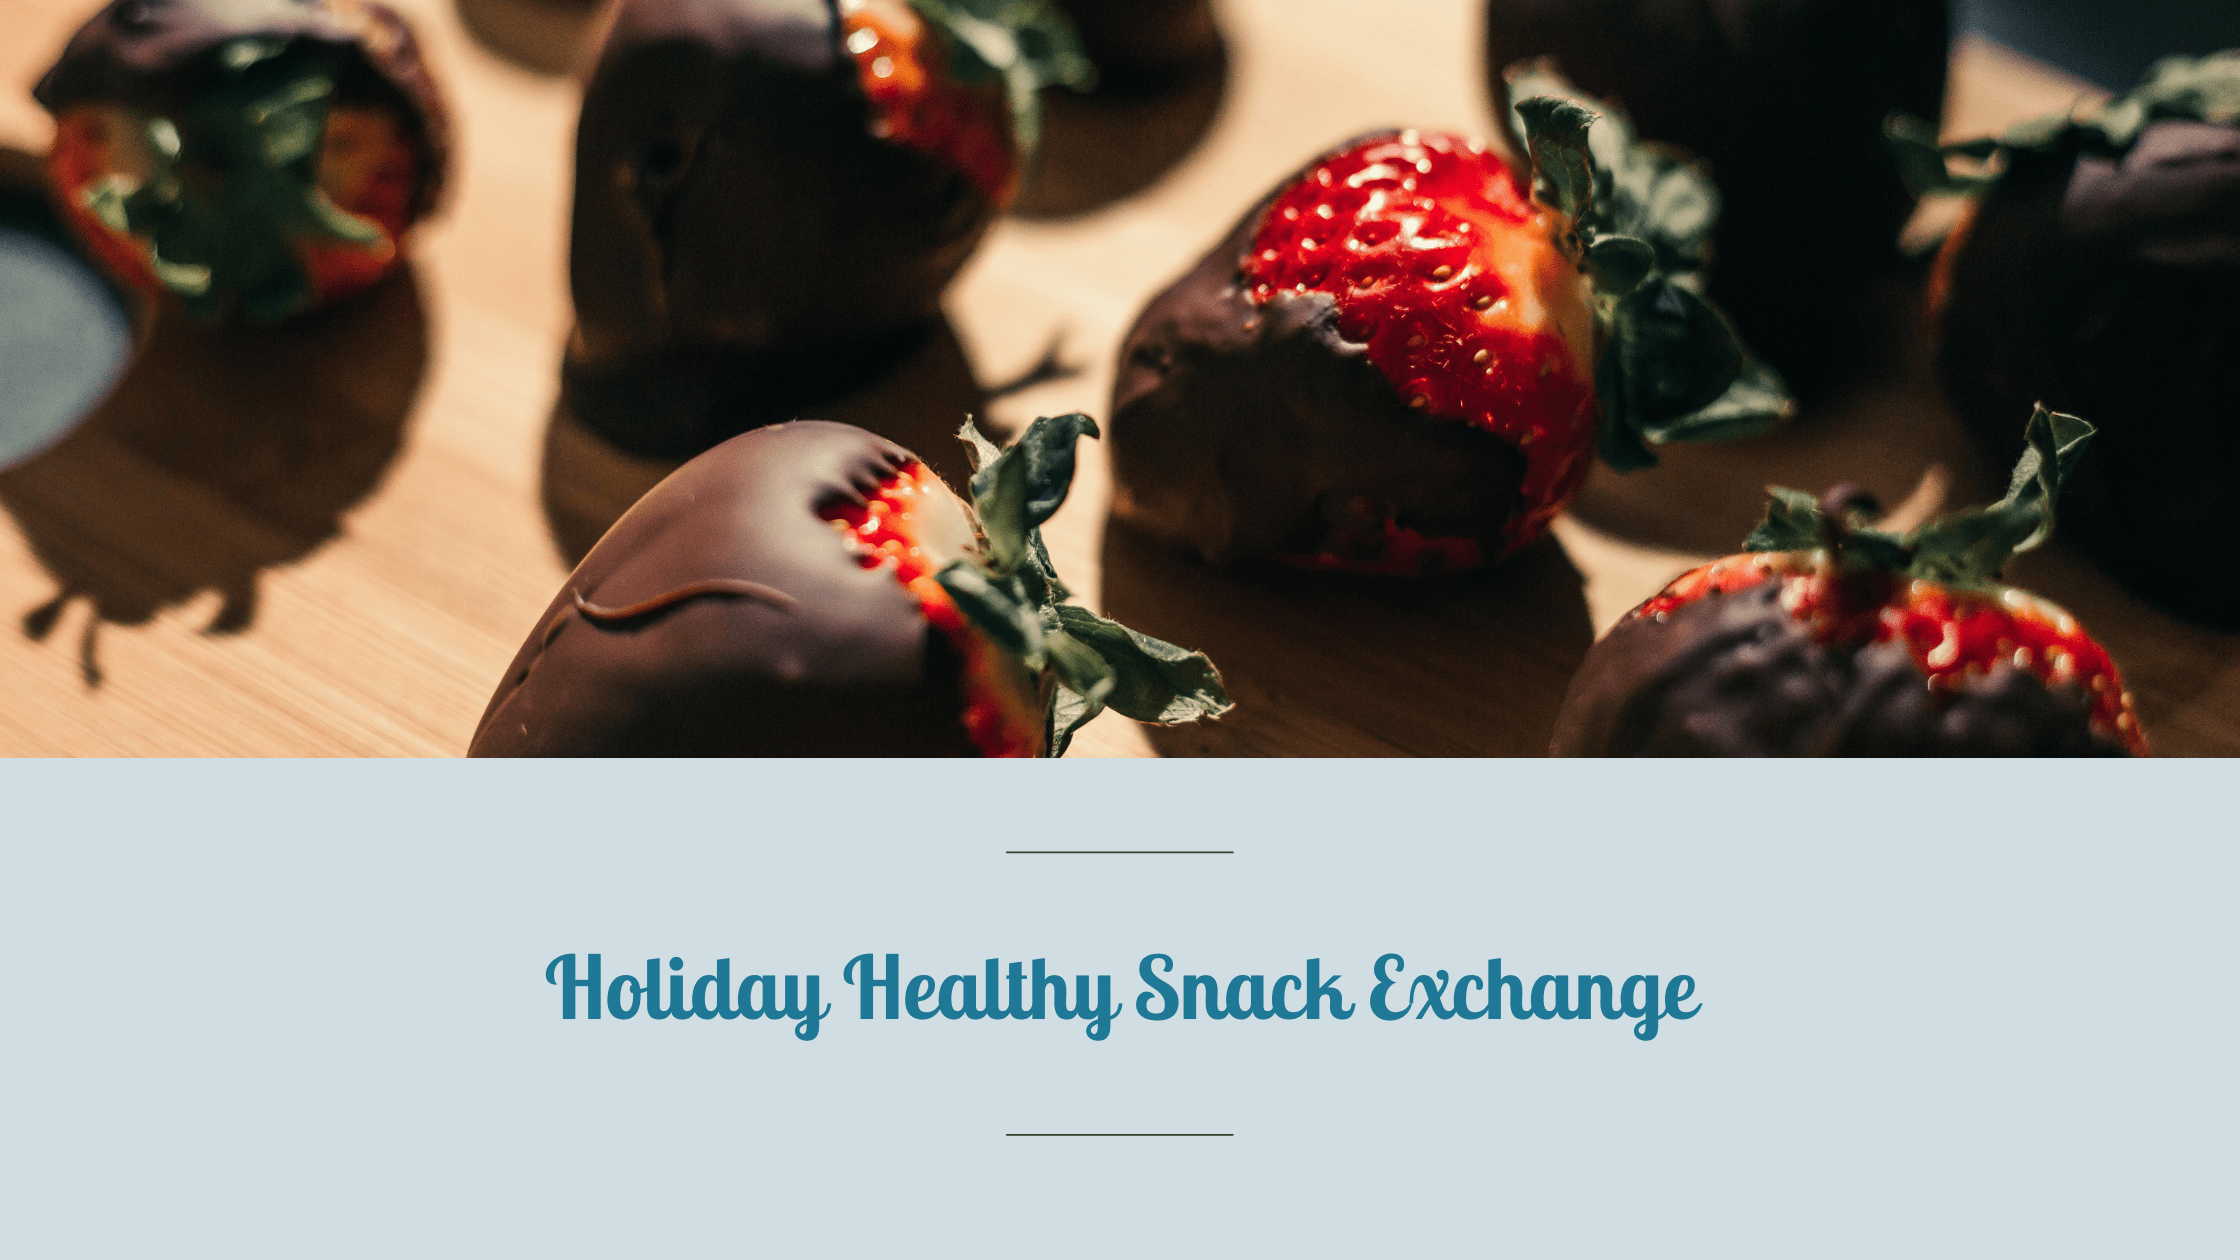 Healthy snacks for the holidays